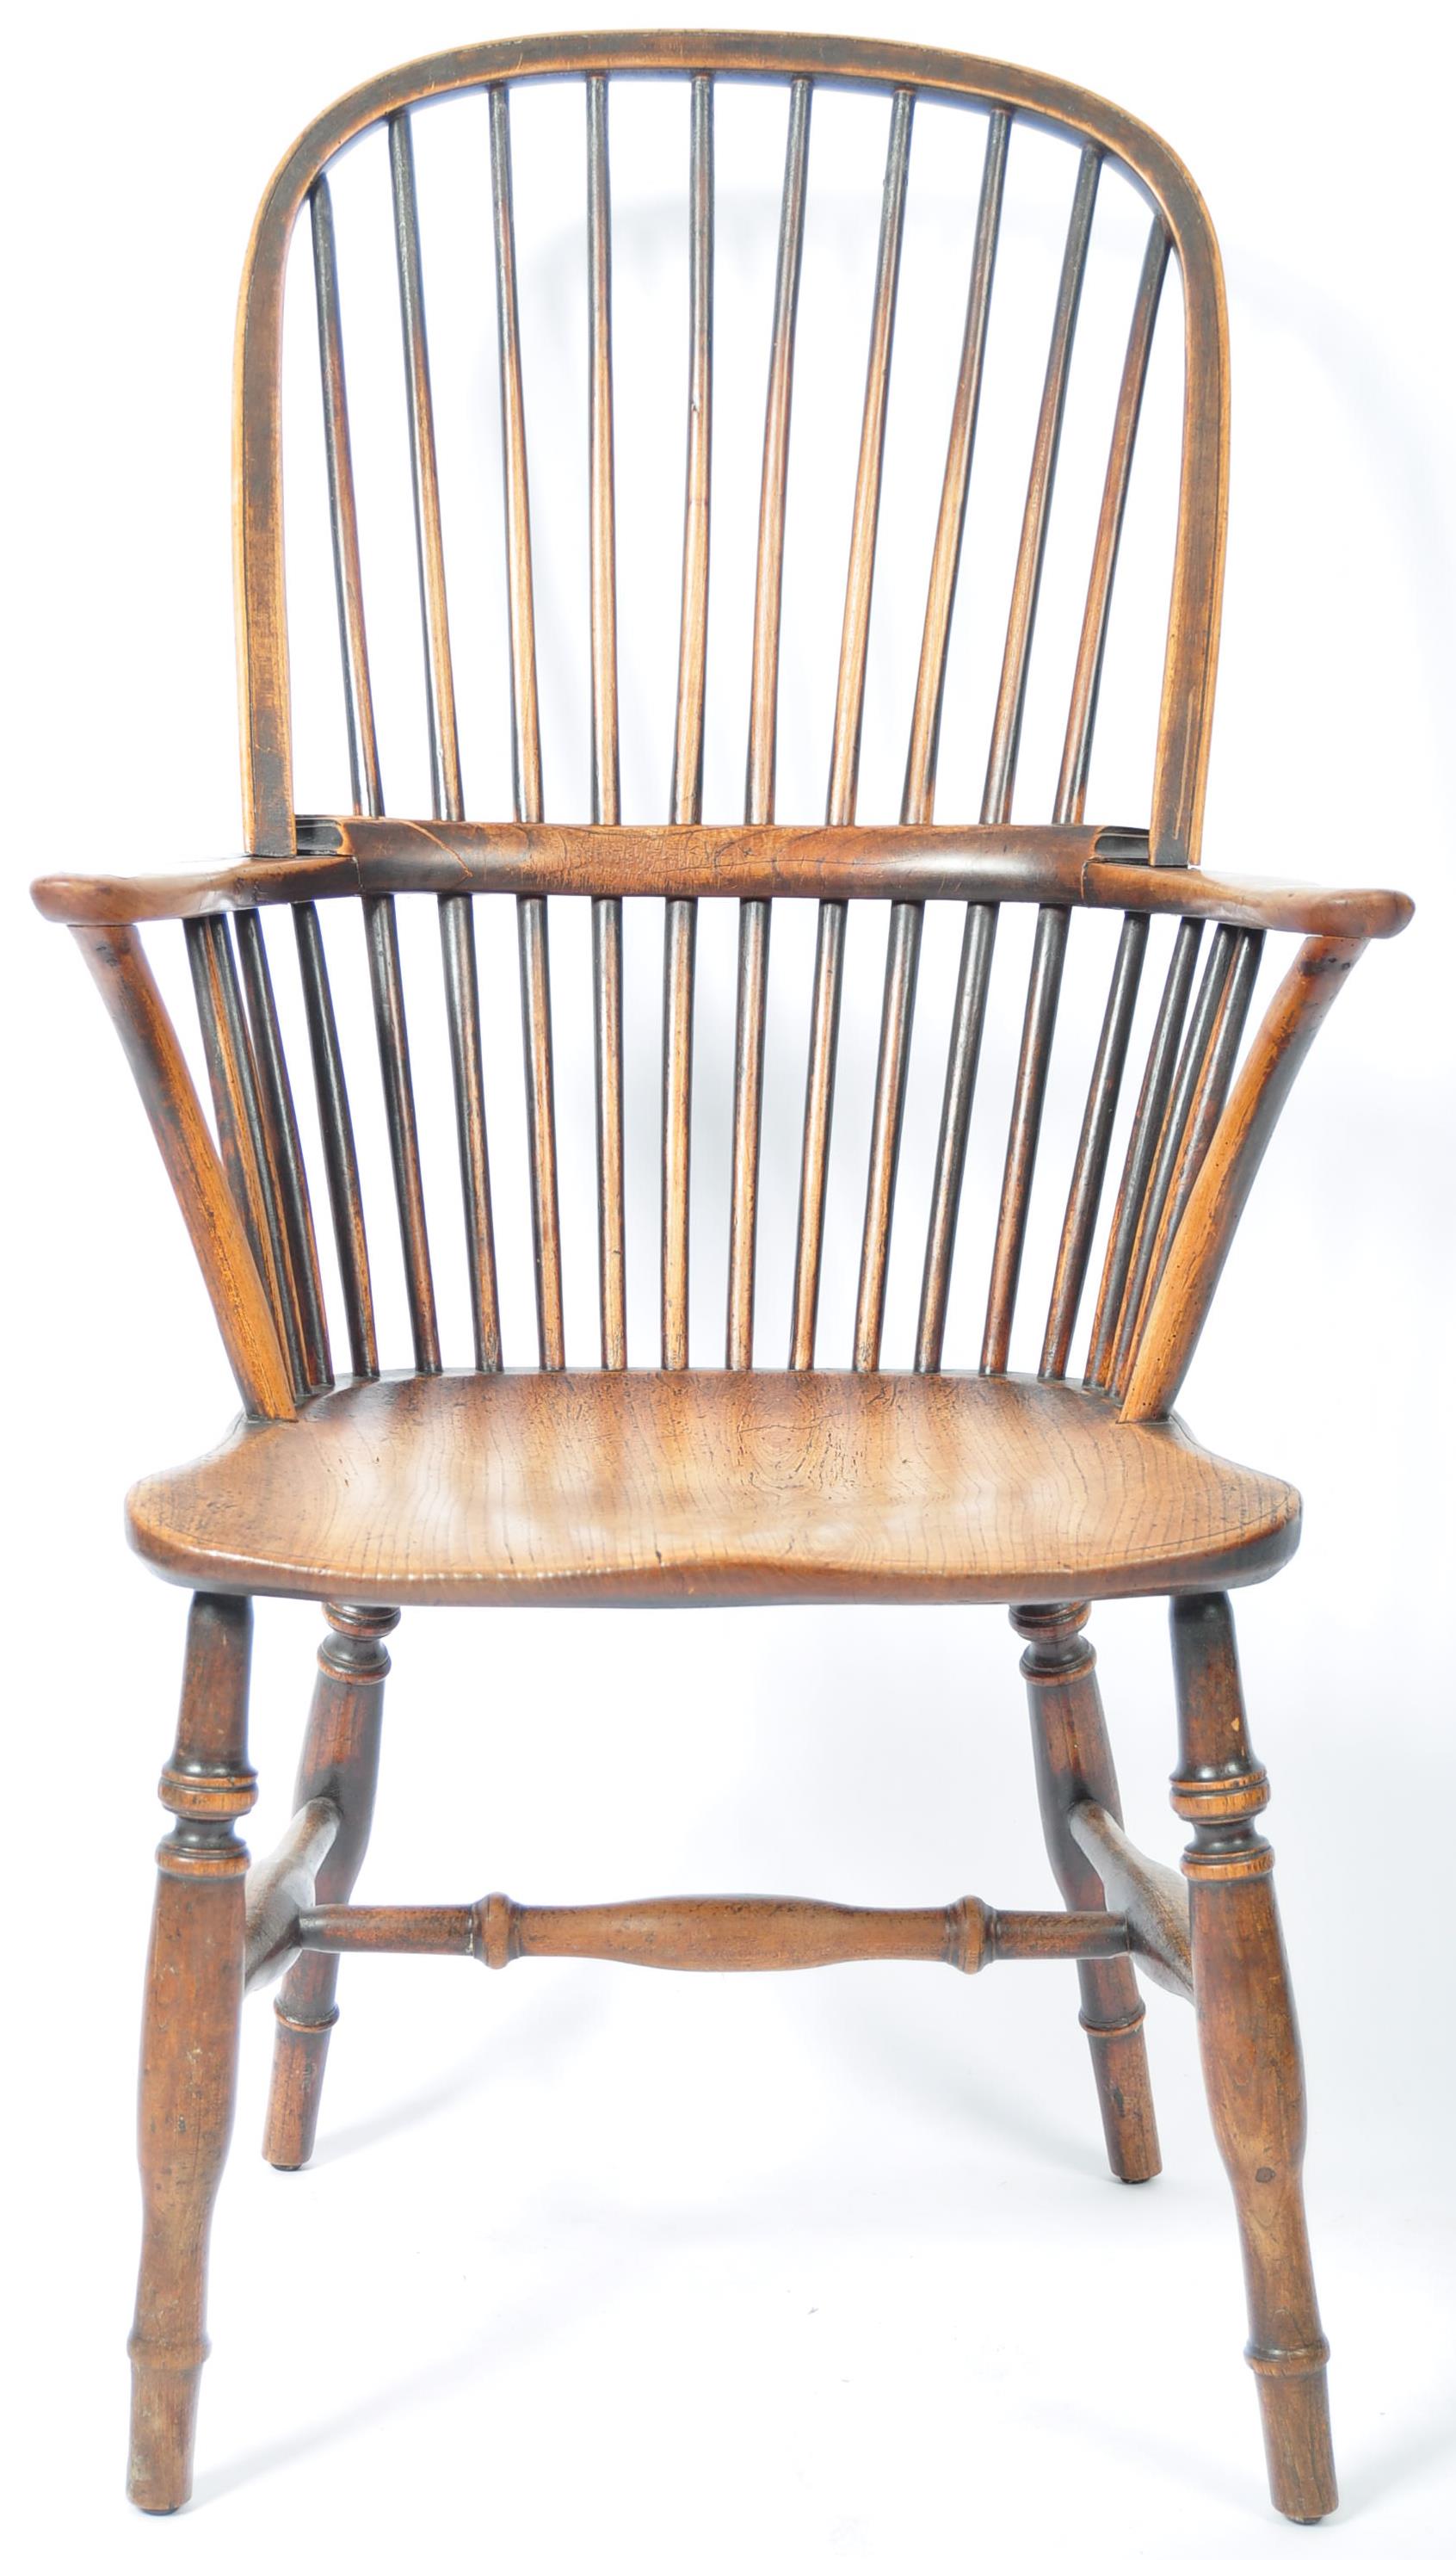 19TH CENTURY ENGLISH ANTIQUE BEECH AND ELM WINDSOR CHAIR - Image 4 of 7